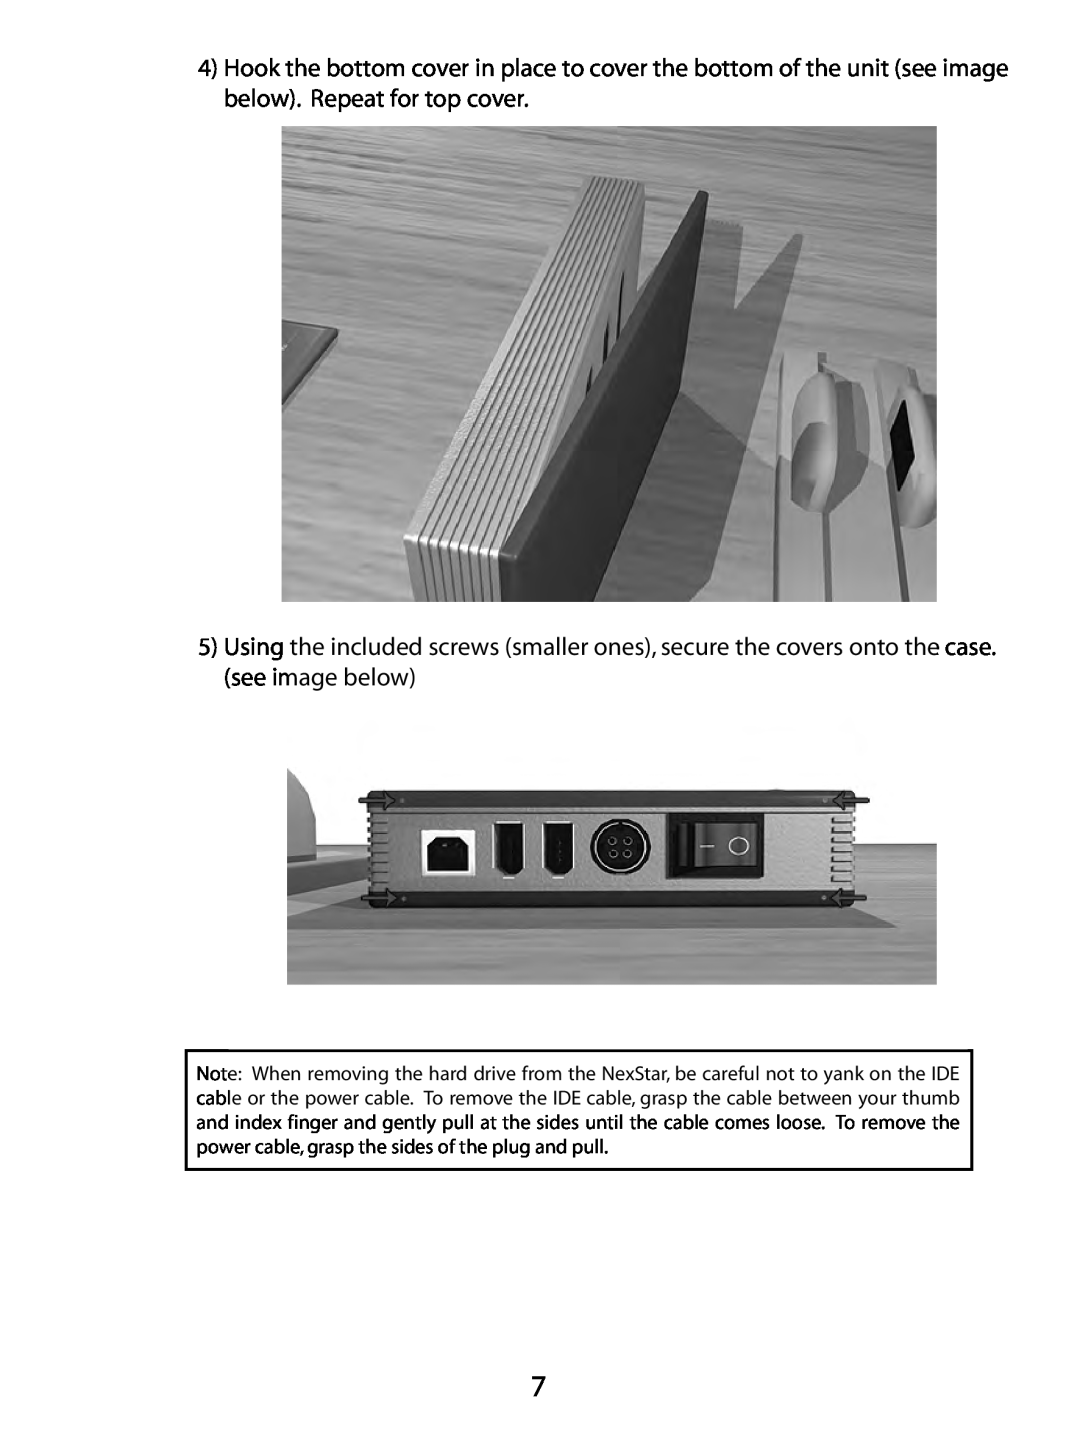 Vantec NST-350U2 4Hook the bottom cover in place to cover the bottom of the unit see image below. Repeat for top cover 